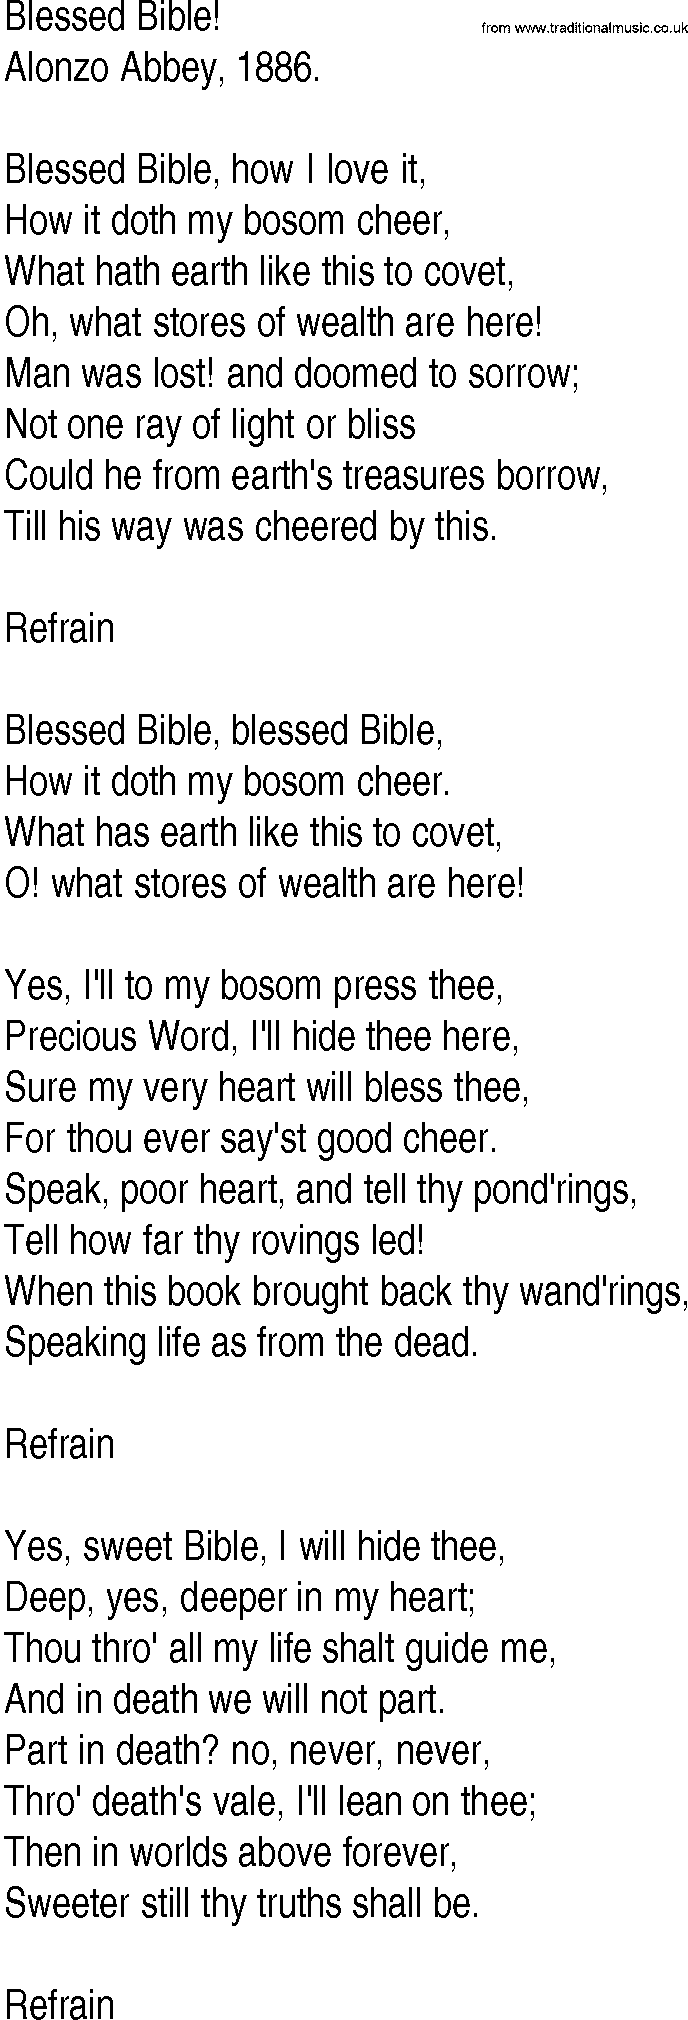 Hymn and Gospel Song: Blessed Bible! by Alonzo Abbey lyrics